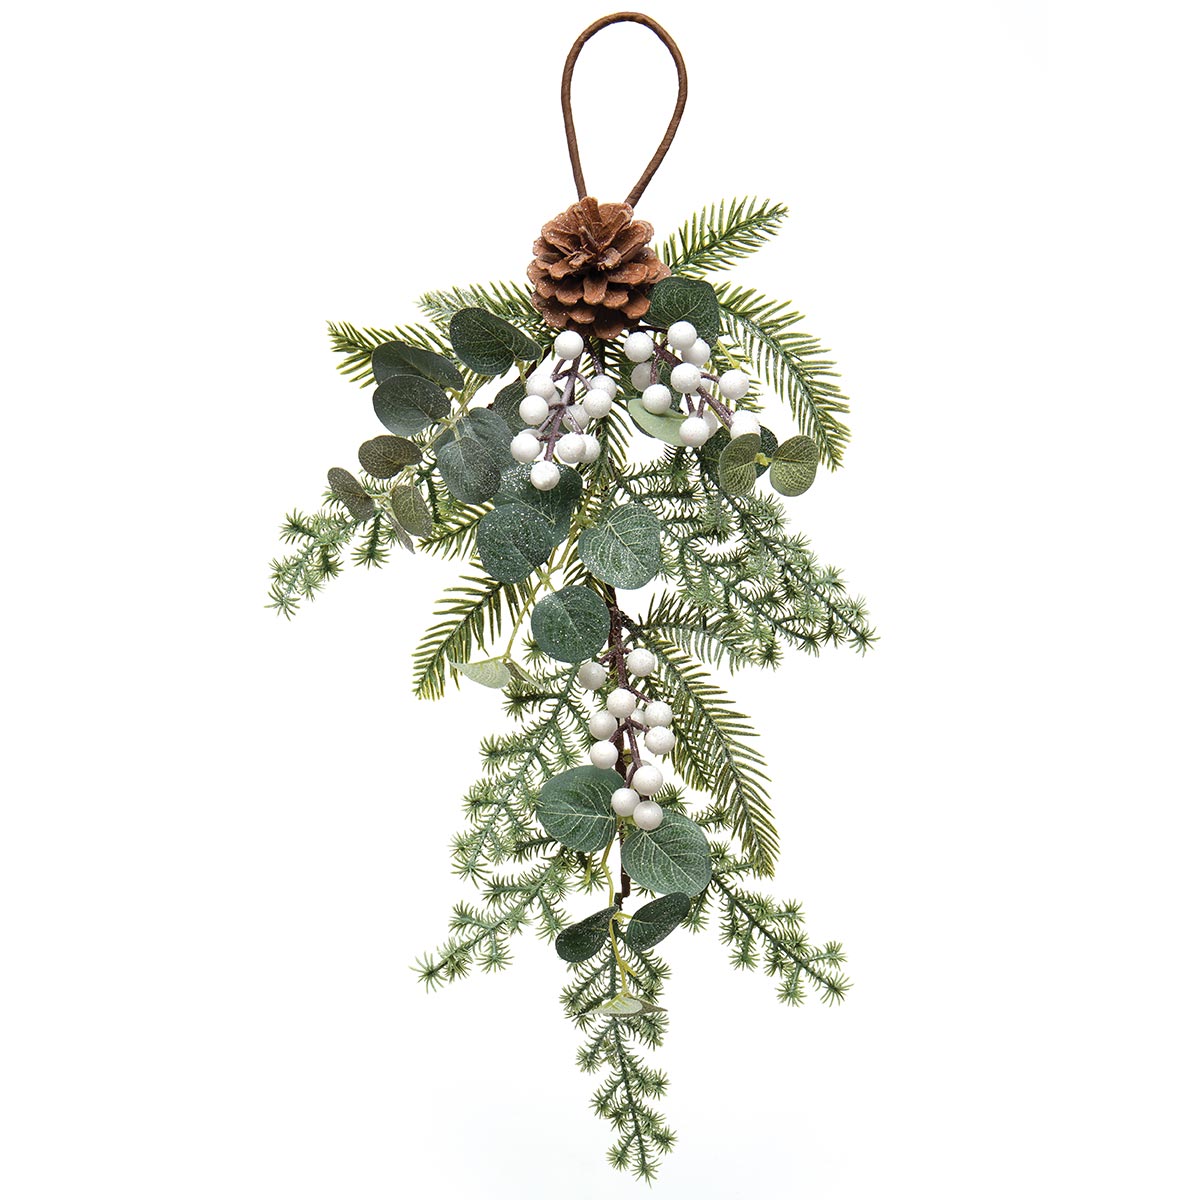 !WINTER BERRY BOUGH WITH WHITE BERRIES, PINE, EUCALYPTUS